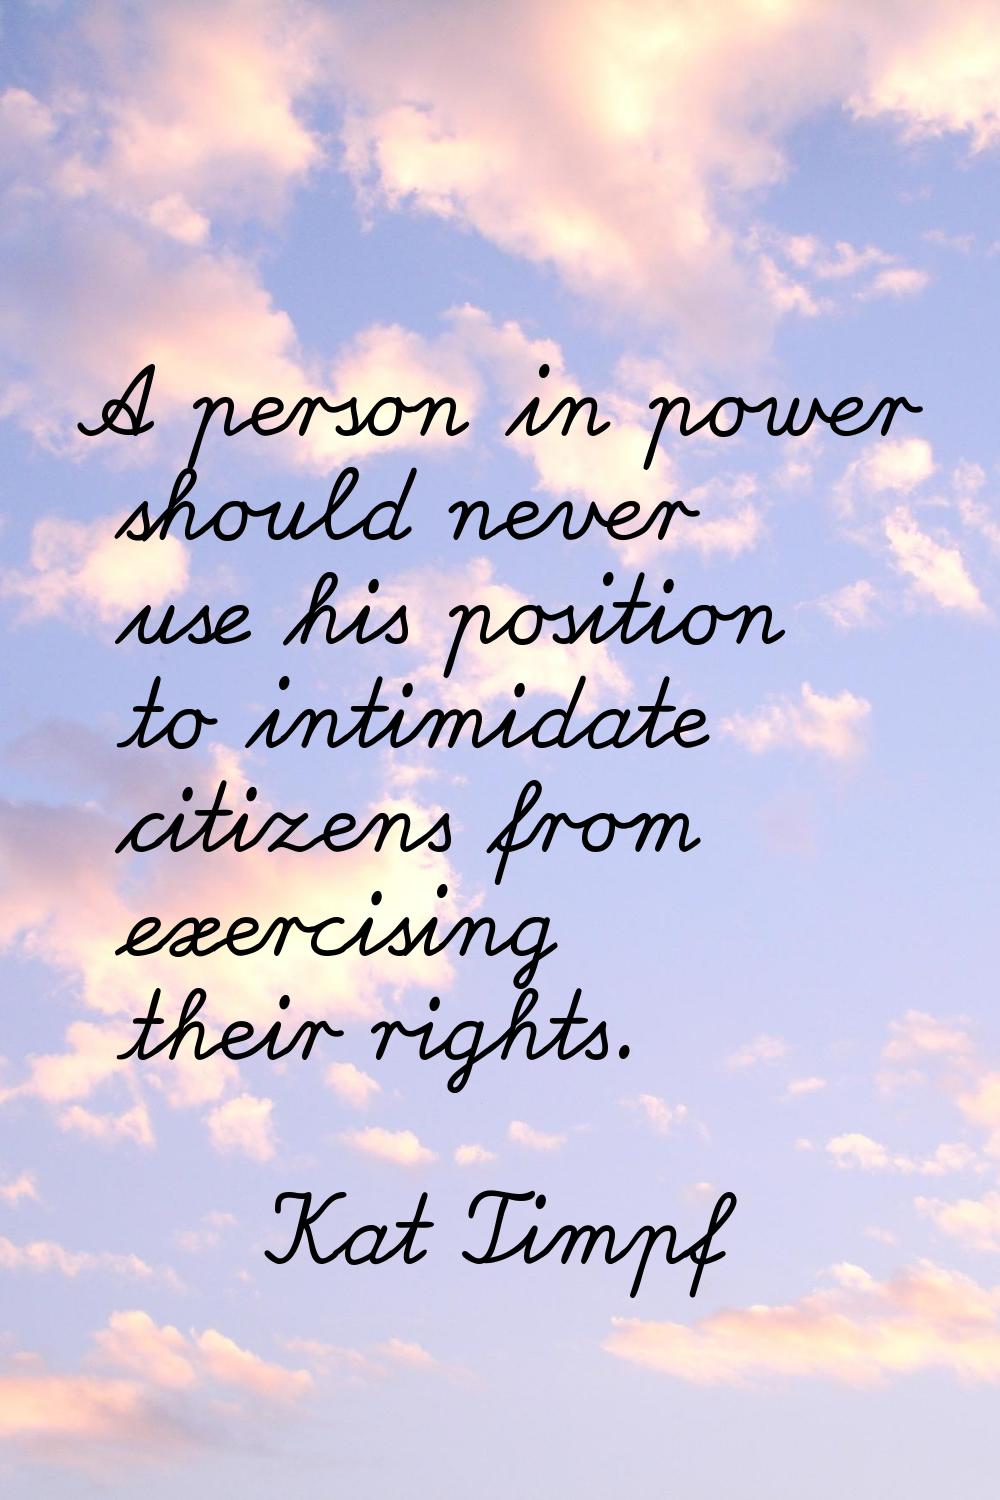 A person in power should never use his position to intimidate citizens from exercising their rights